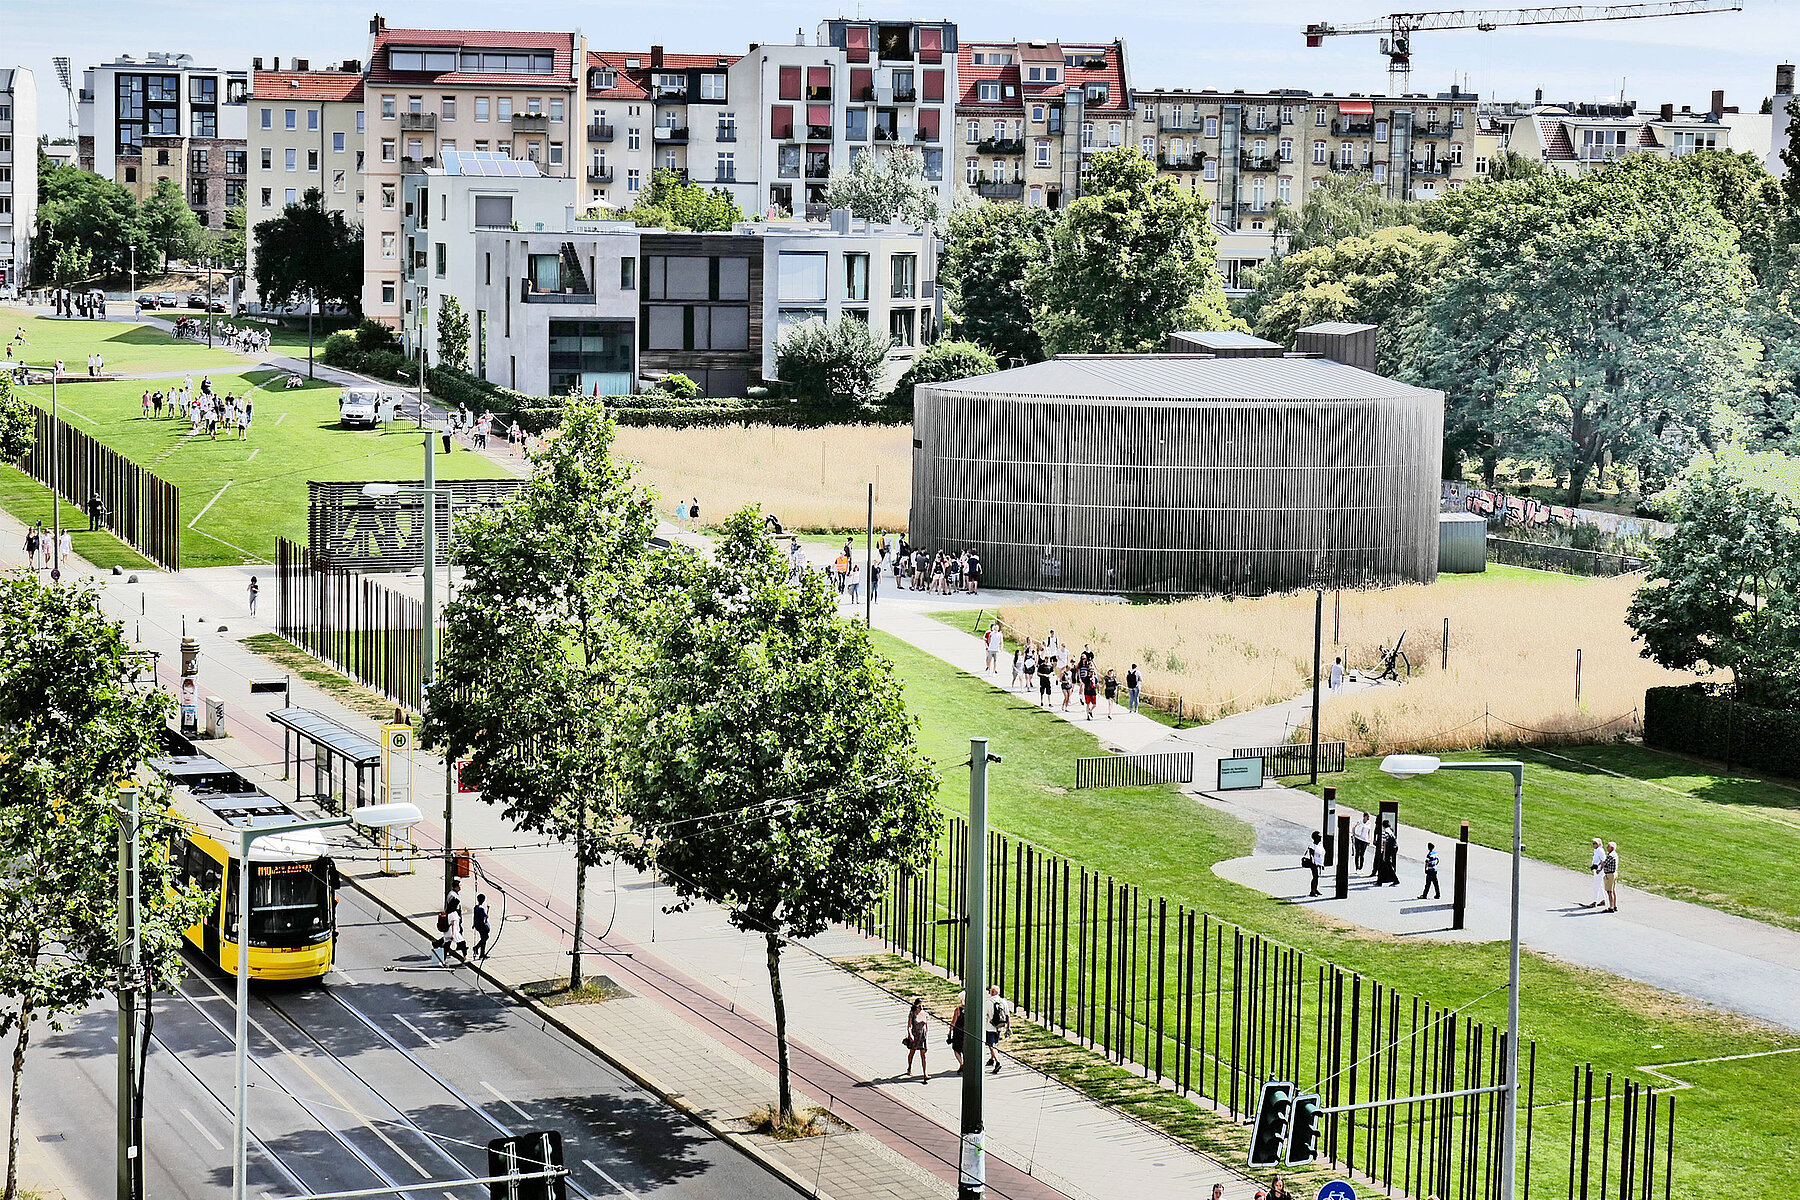 A yellow tram runs along the grounds of the Berlin Wall Memorial, which is on the left, down Bernauer Strasse.